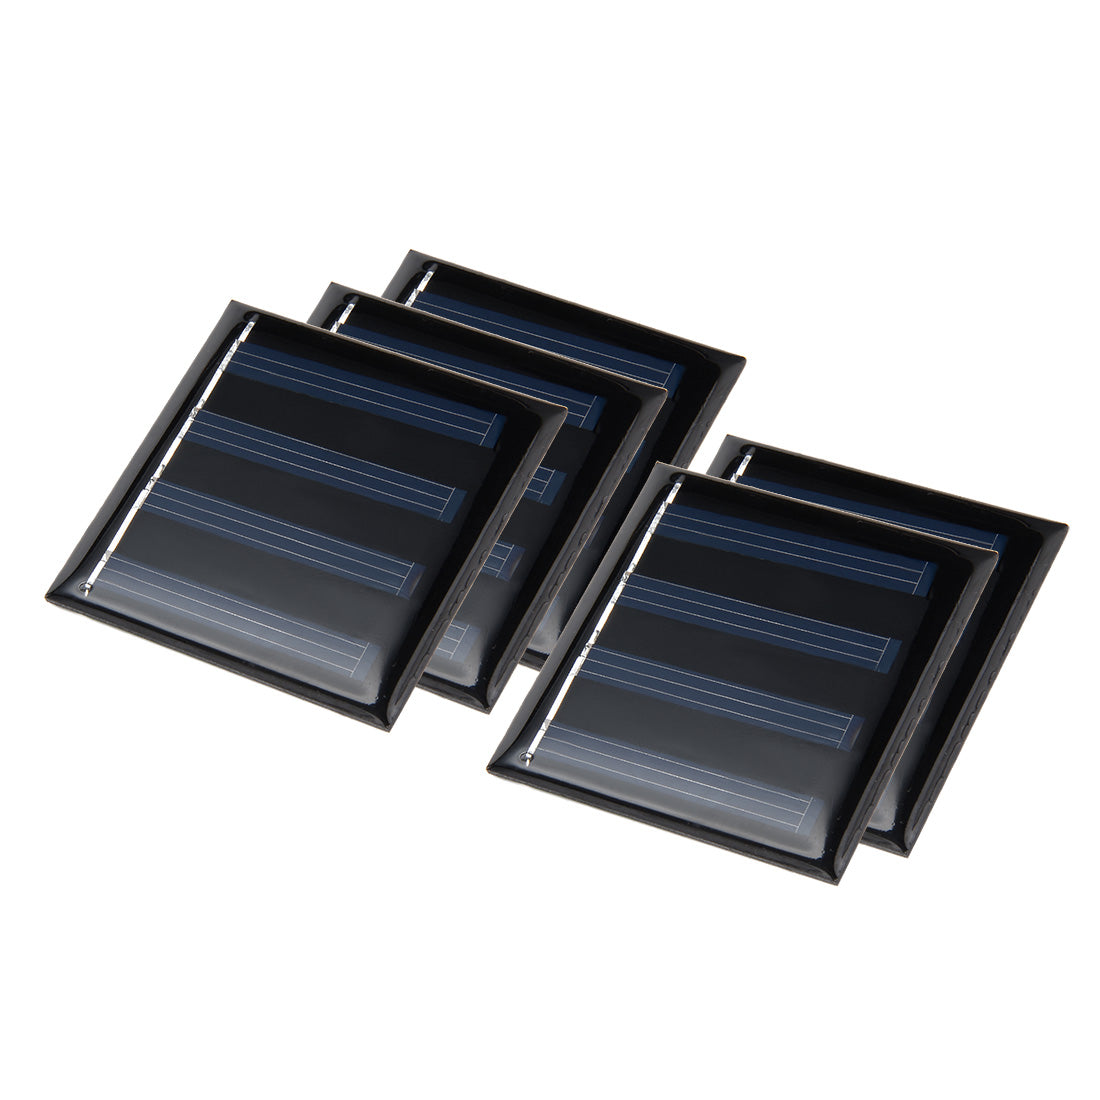 uxcell Uxcell 5Pcs 2V 50mA Poly Mini Solar Cell Panel Module DIY for Light Toys Charger 49.8mm x 49.8mm